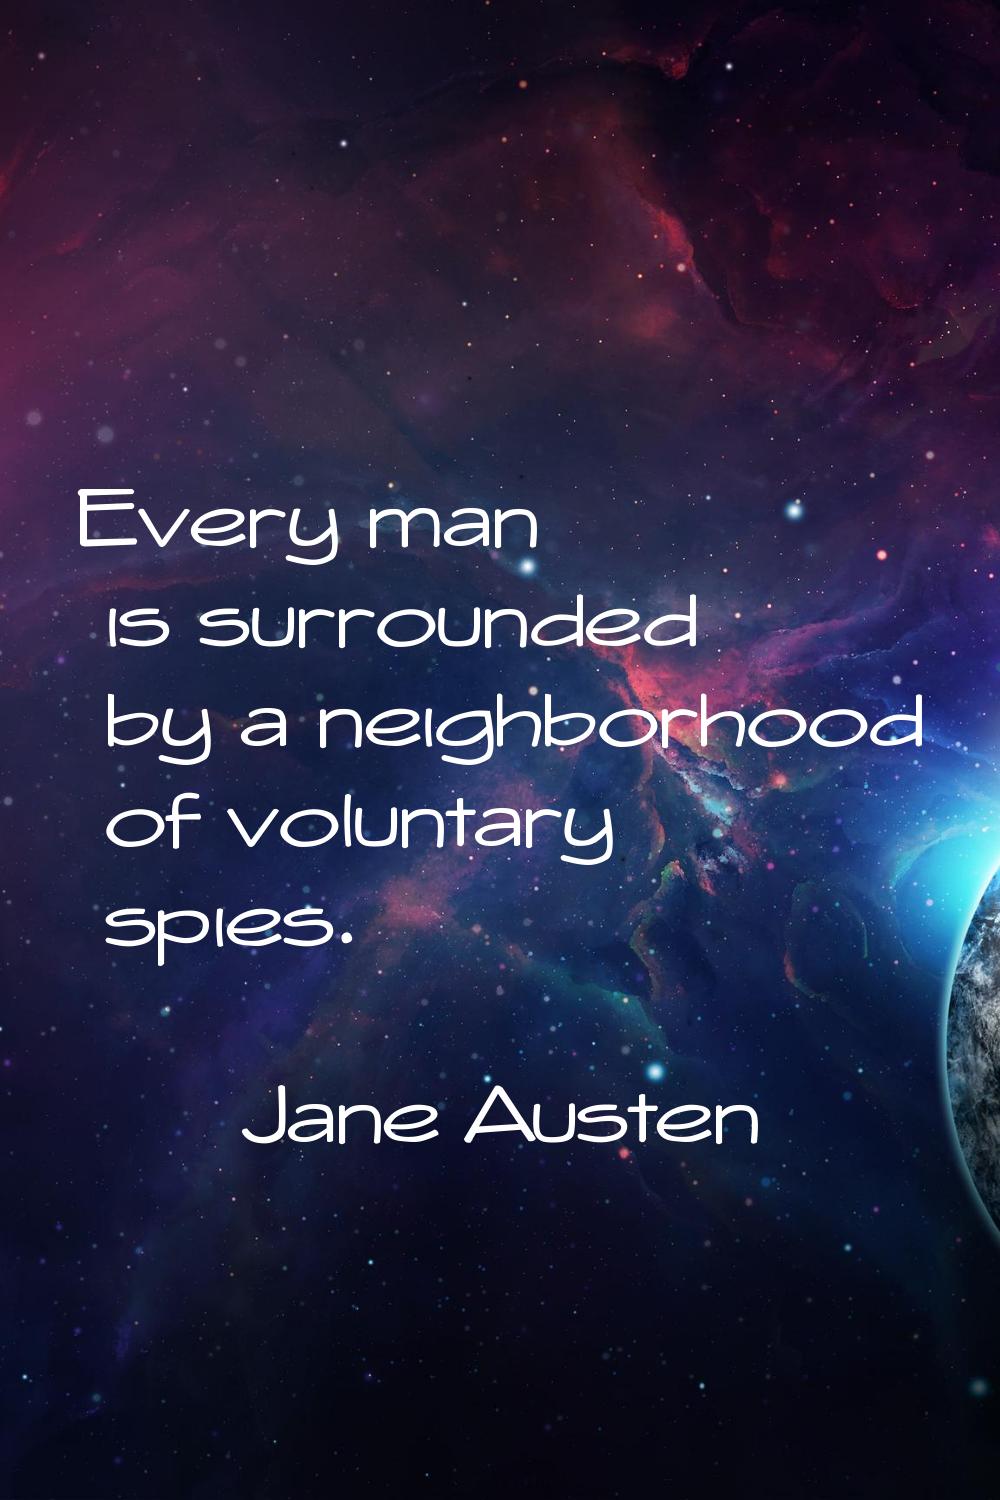 Every man is surrounded by a neighborhood of voluntary spies.